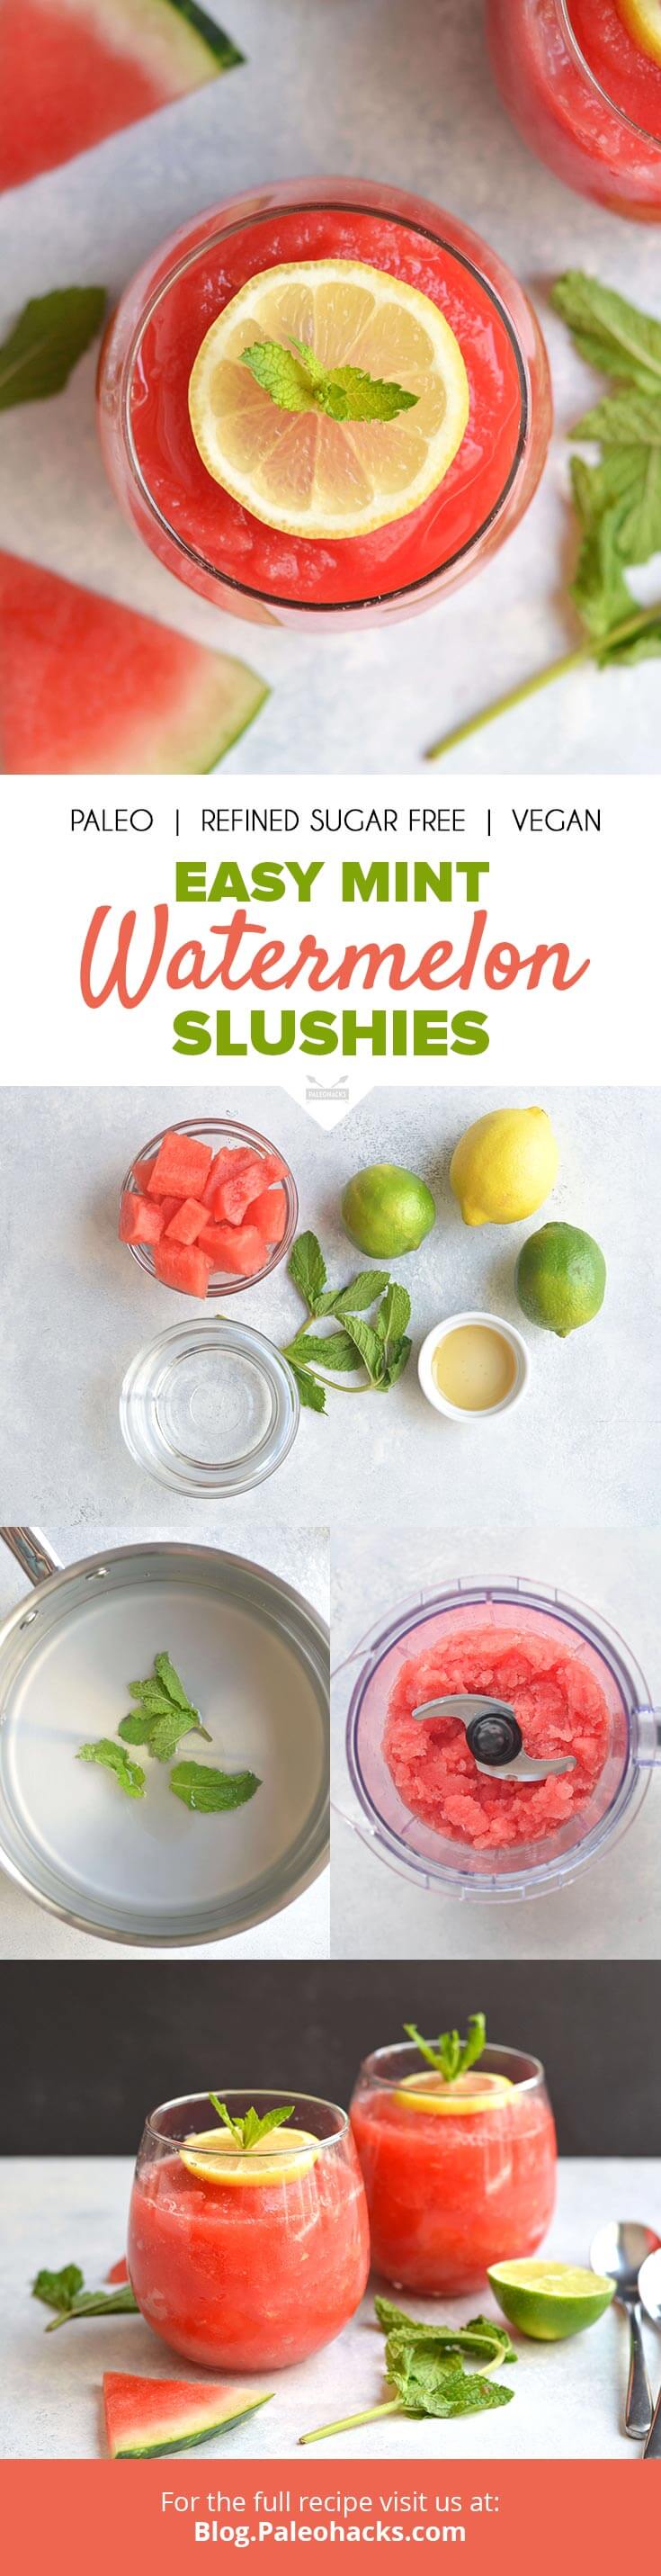 These thirst-quenching watermelon slushies are garnished with fresh mint leaves for an invigorating, icy drink. All you need is four ingredients!